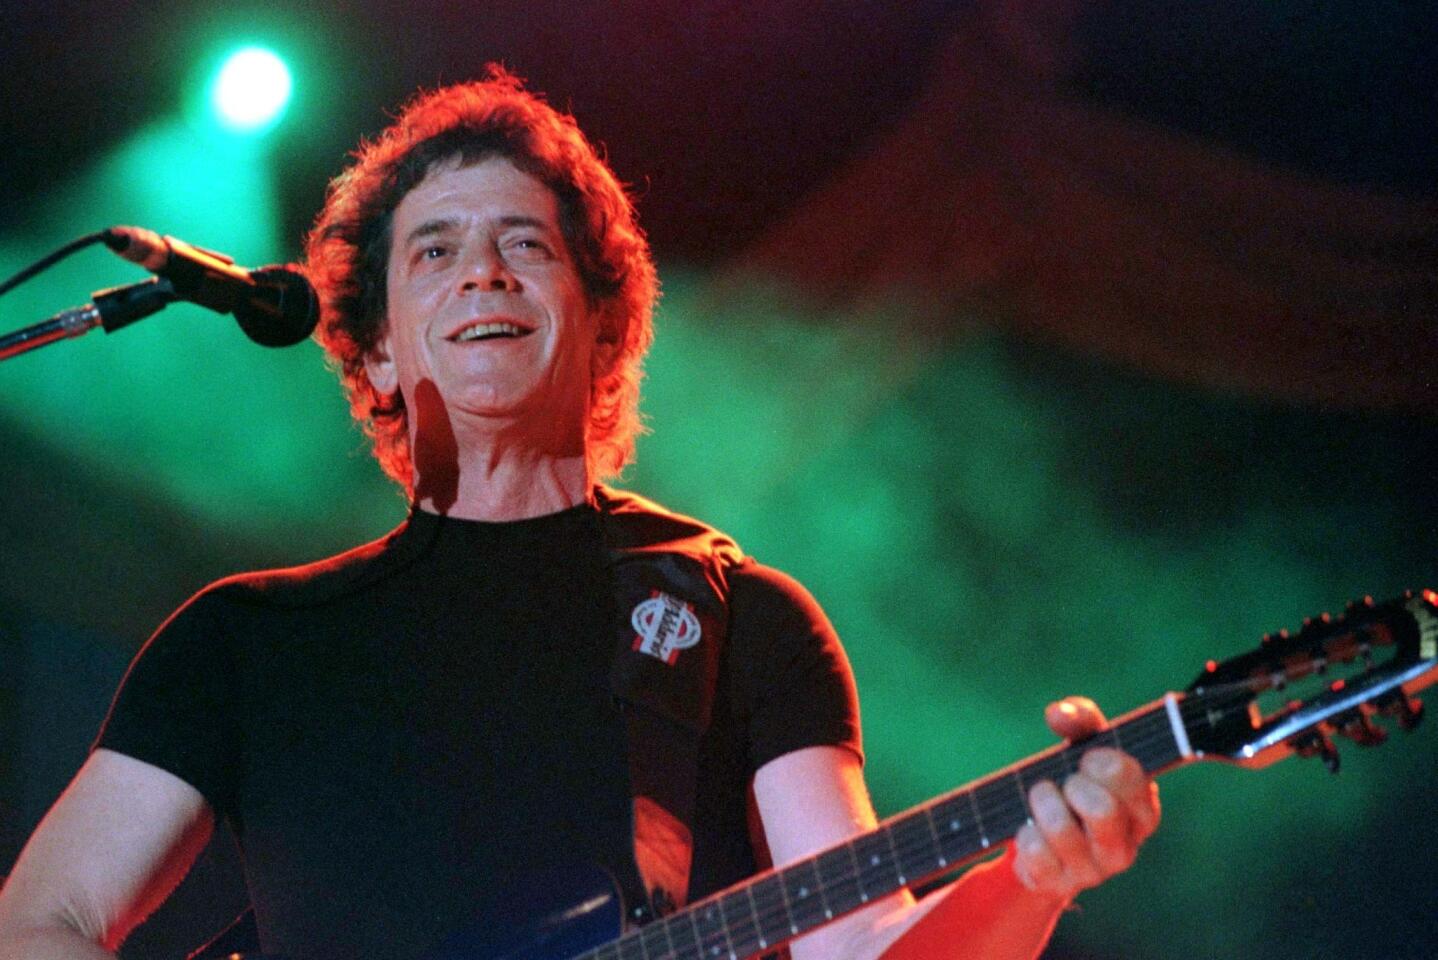 Famous rock singer Lou Reed performs at the Panathinaikos stadium in Athens during a rock festival, July 1, 1996. The two-day festival included performances from David Bowie and Elvis Costello.